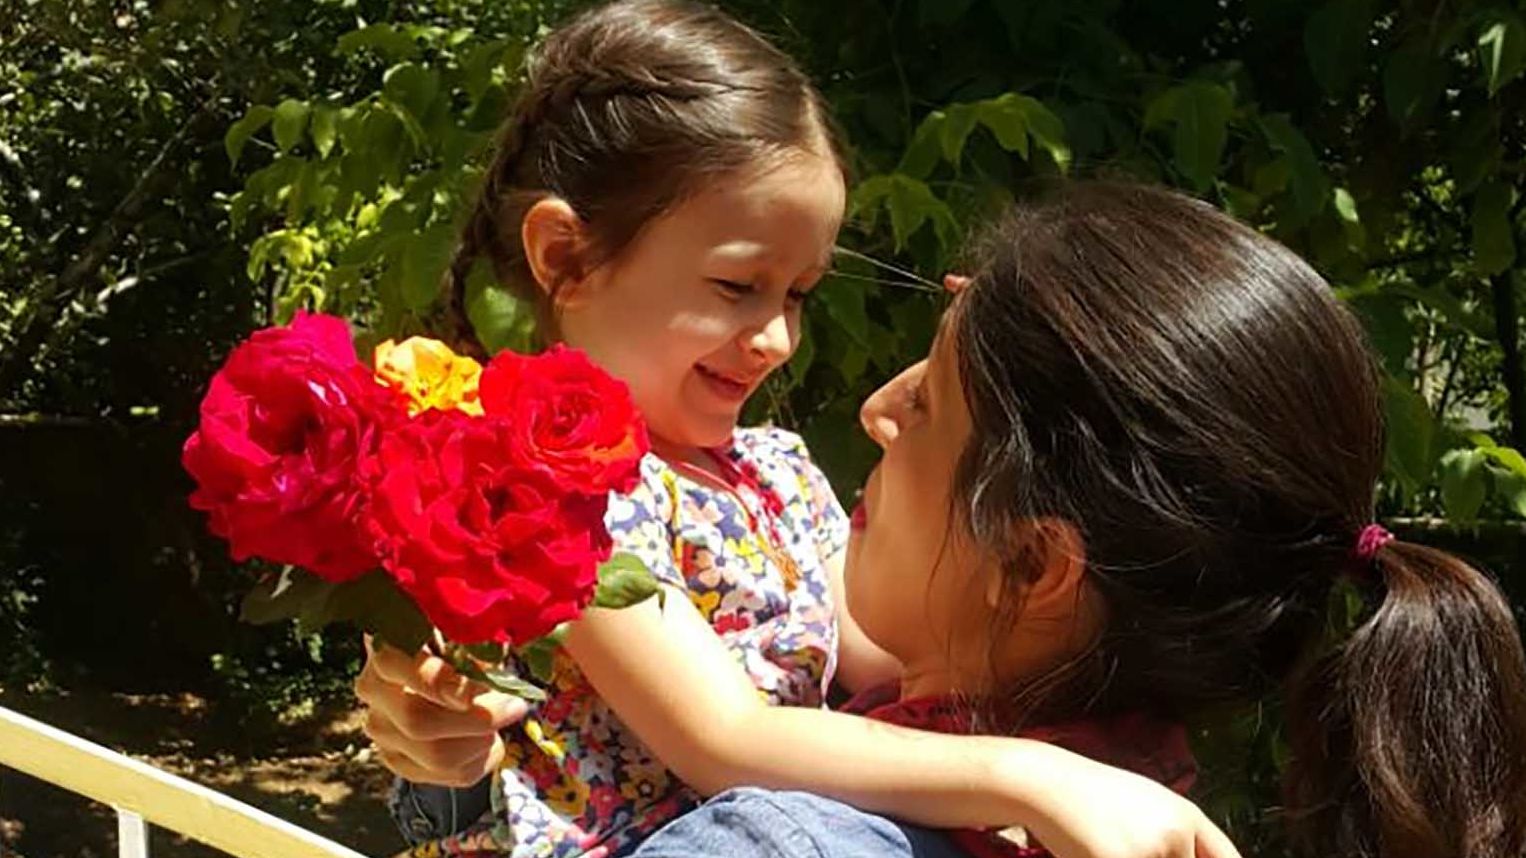 Nazanin Zaghari-Ratcliffe was temporarily reunited with her daughter Gabriella in Iran on Thursday.